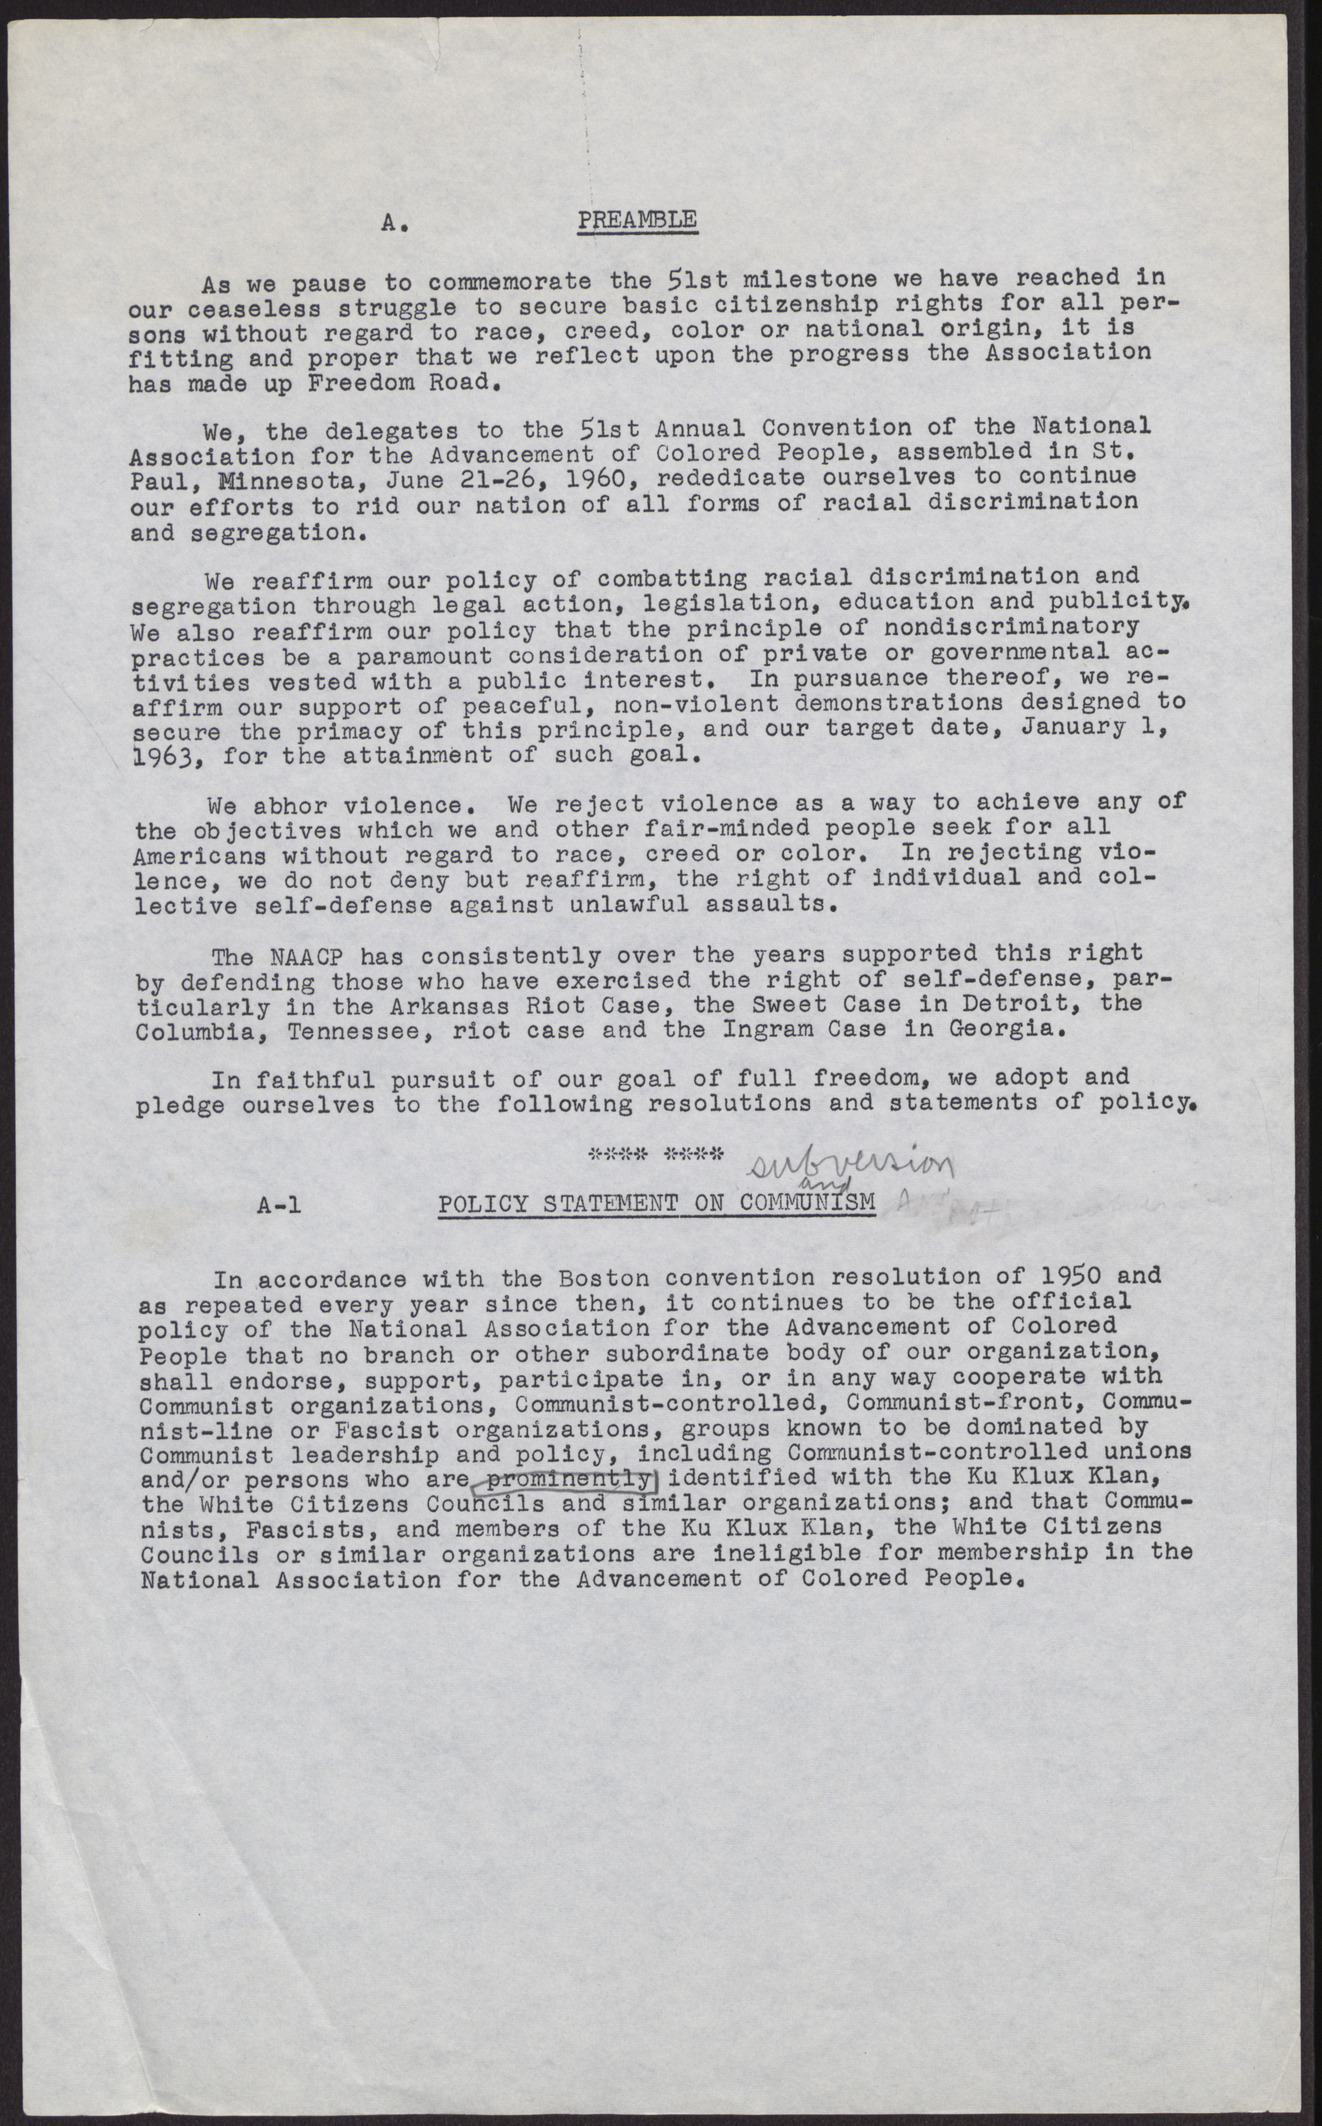 NAACP resolutions and statements of policy (3 pages), June 21-26, 1960